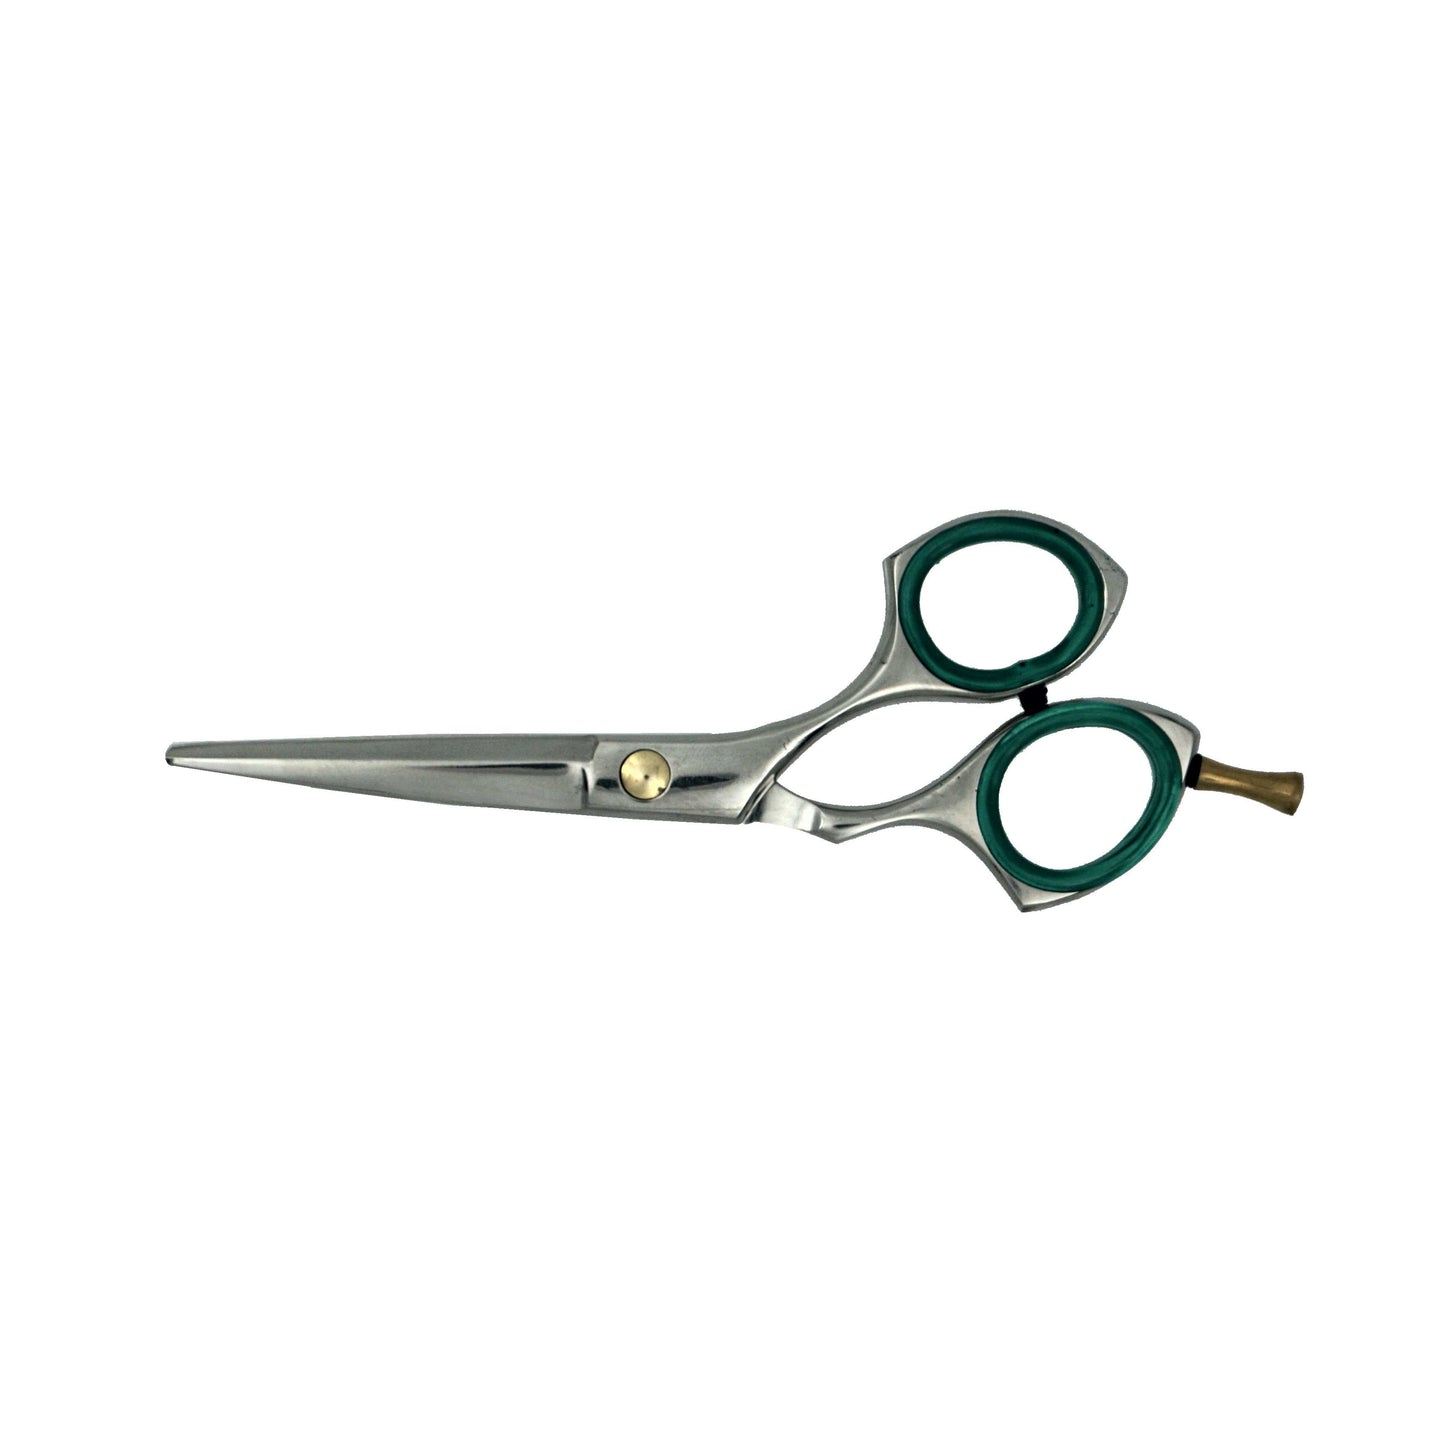 5" Right Handed, Stainless Steel Professional Shear, Removable Finger Rest